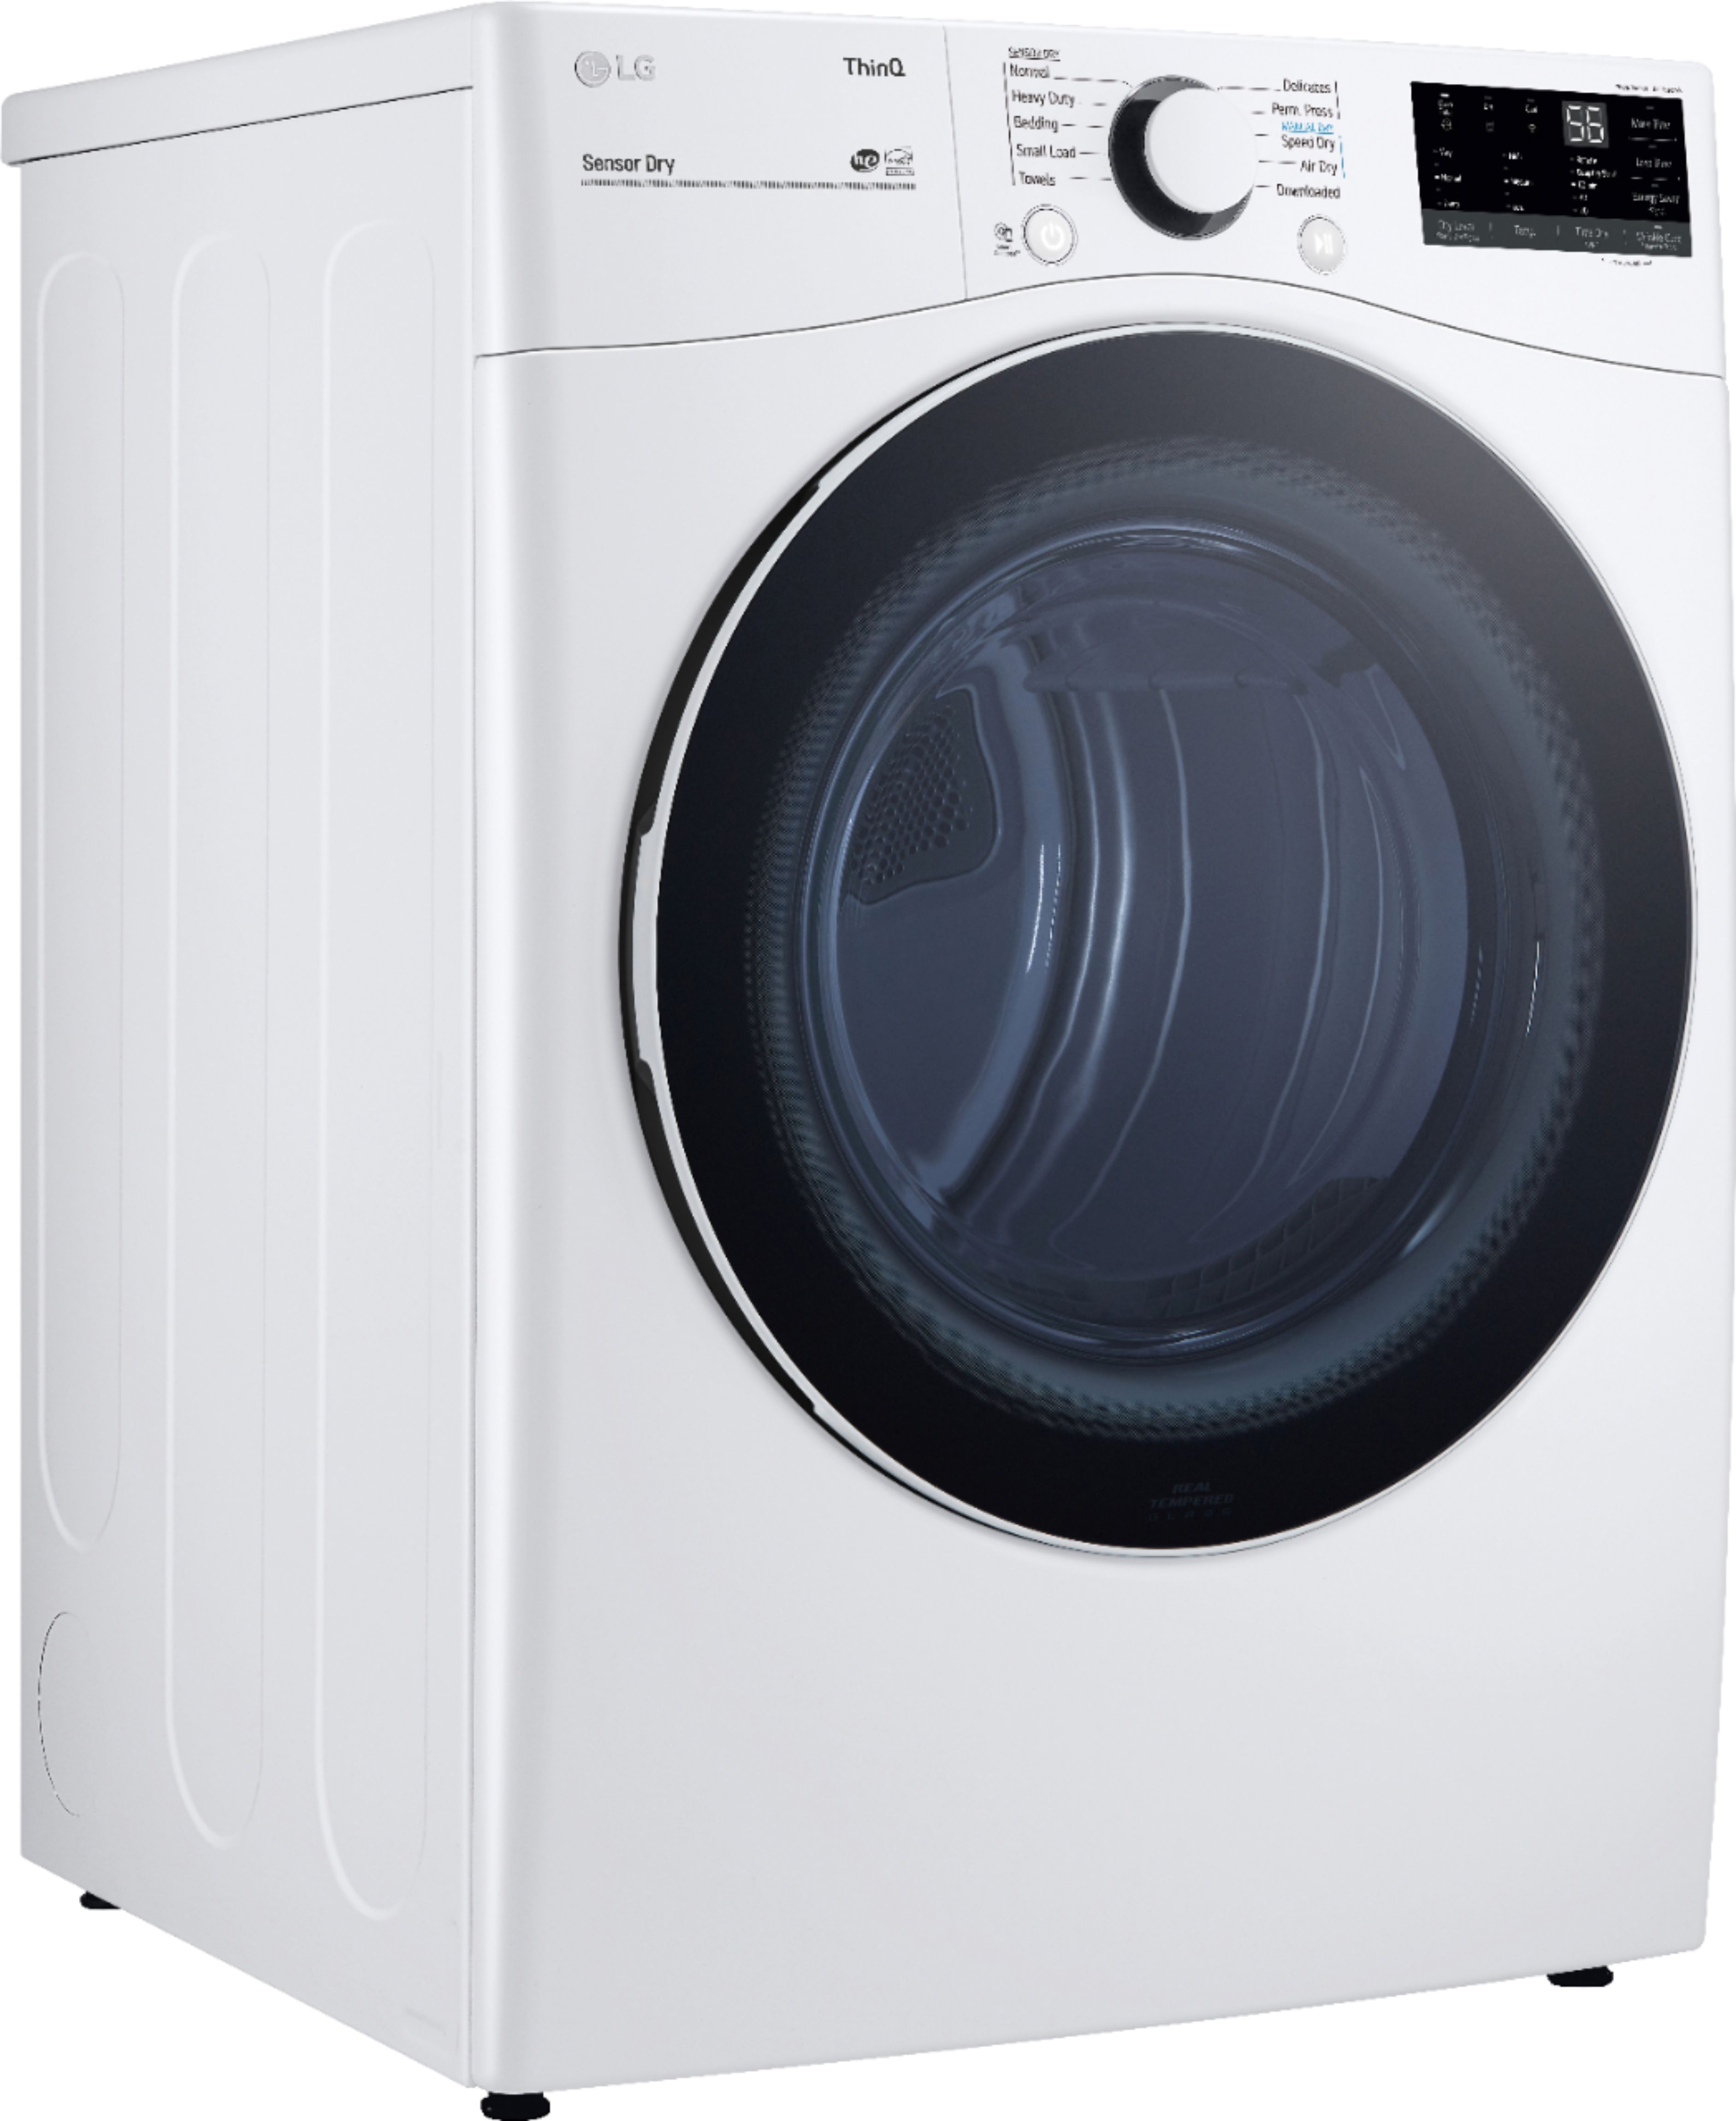 Angle View: Samsung - 7.2 Cu. Ft. Gas Dryer with Sensor Dry and 8 Drying Cycles - White